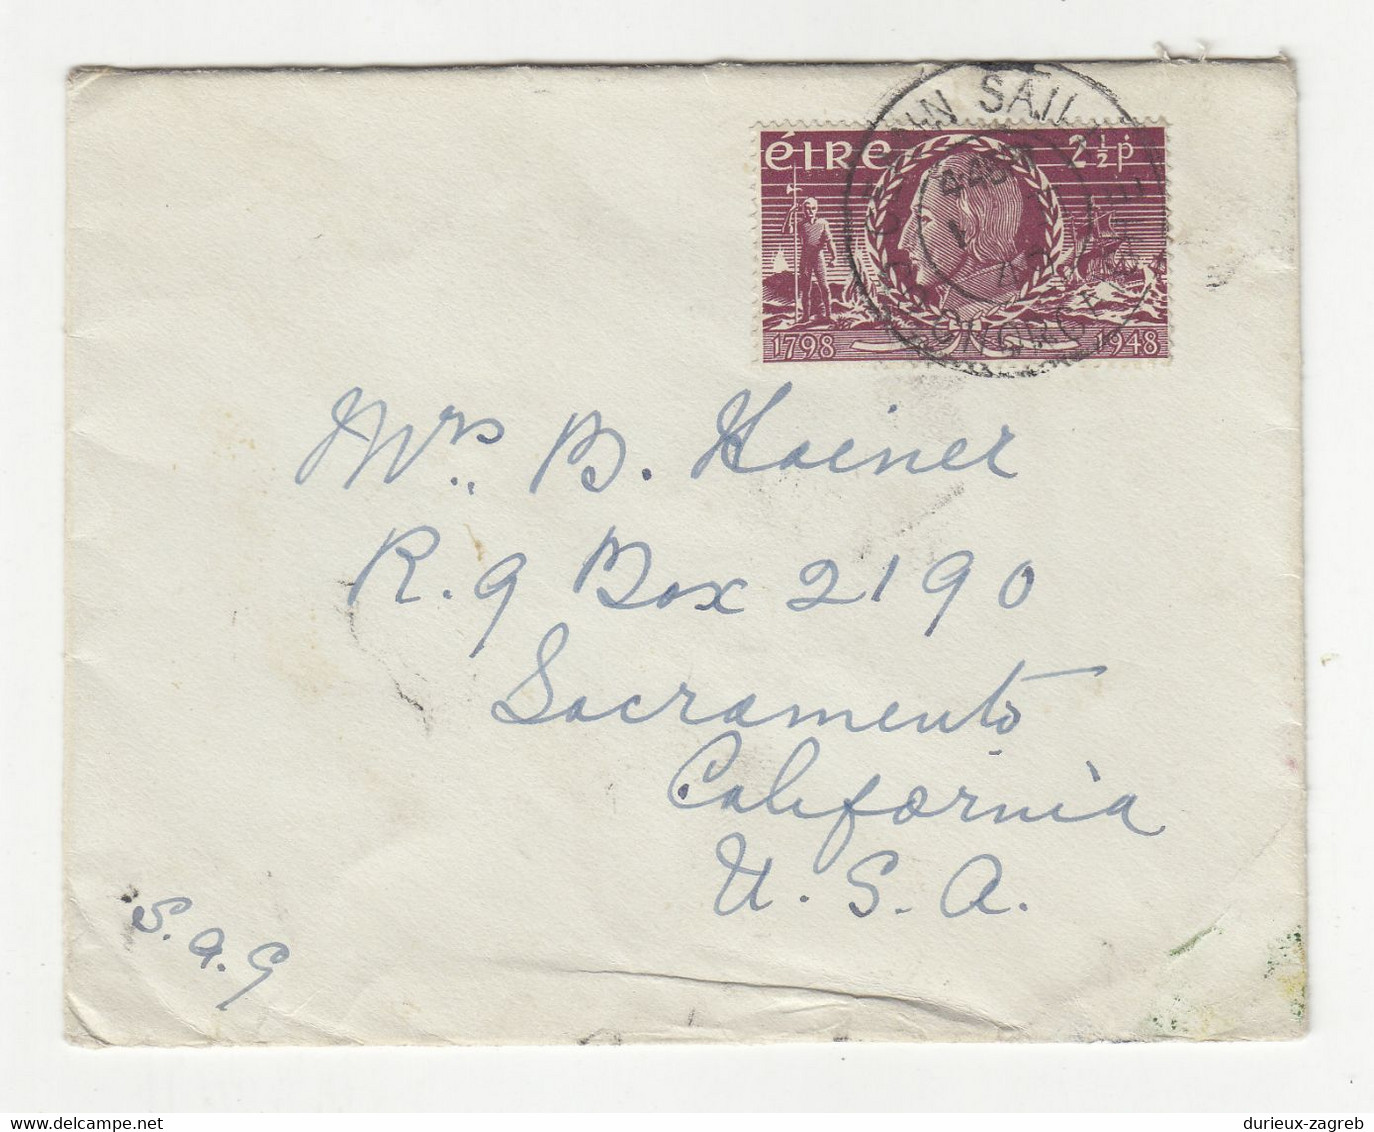 Eire Letter Cover Posted 1949 Kinsale Pmk B210901 - Covers & Documents